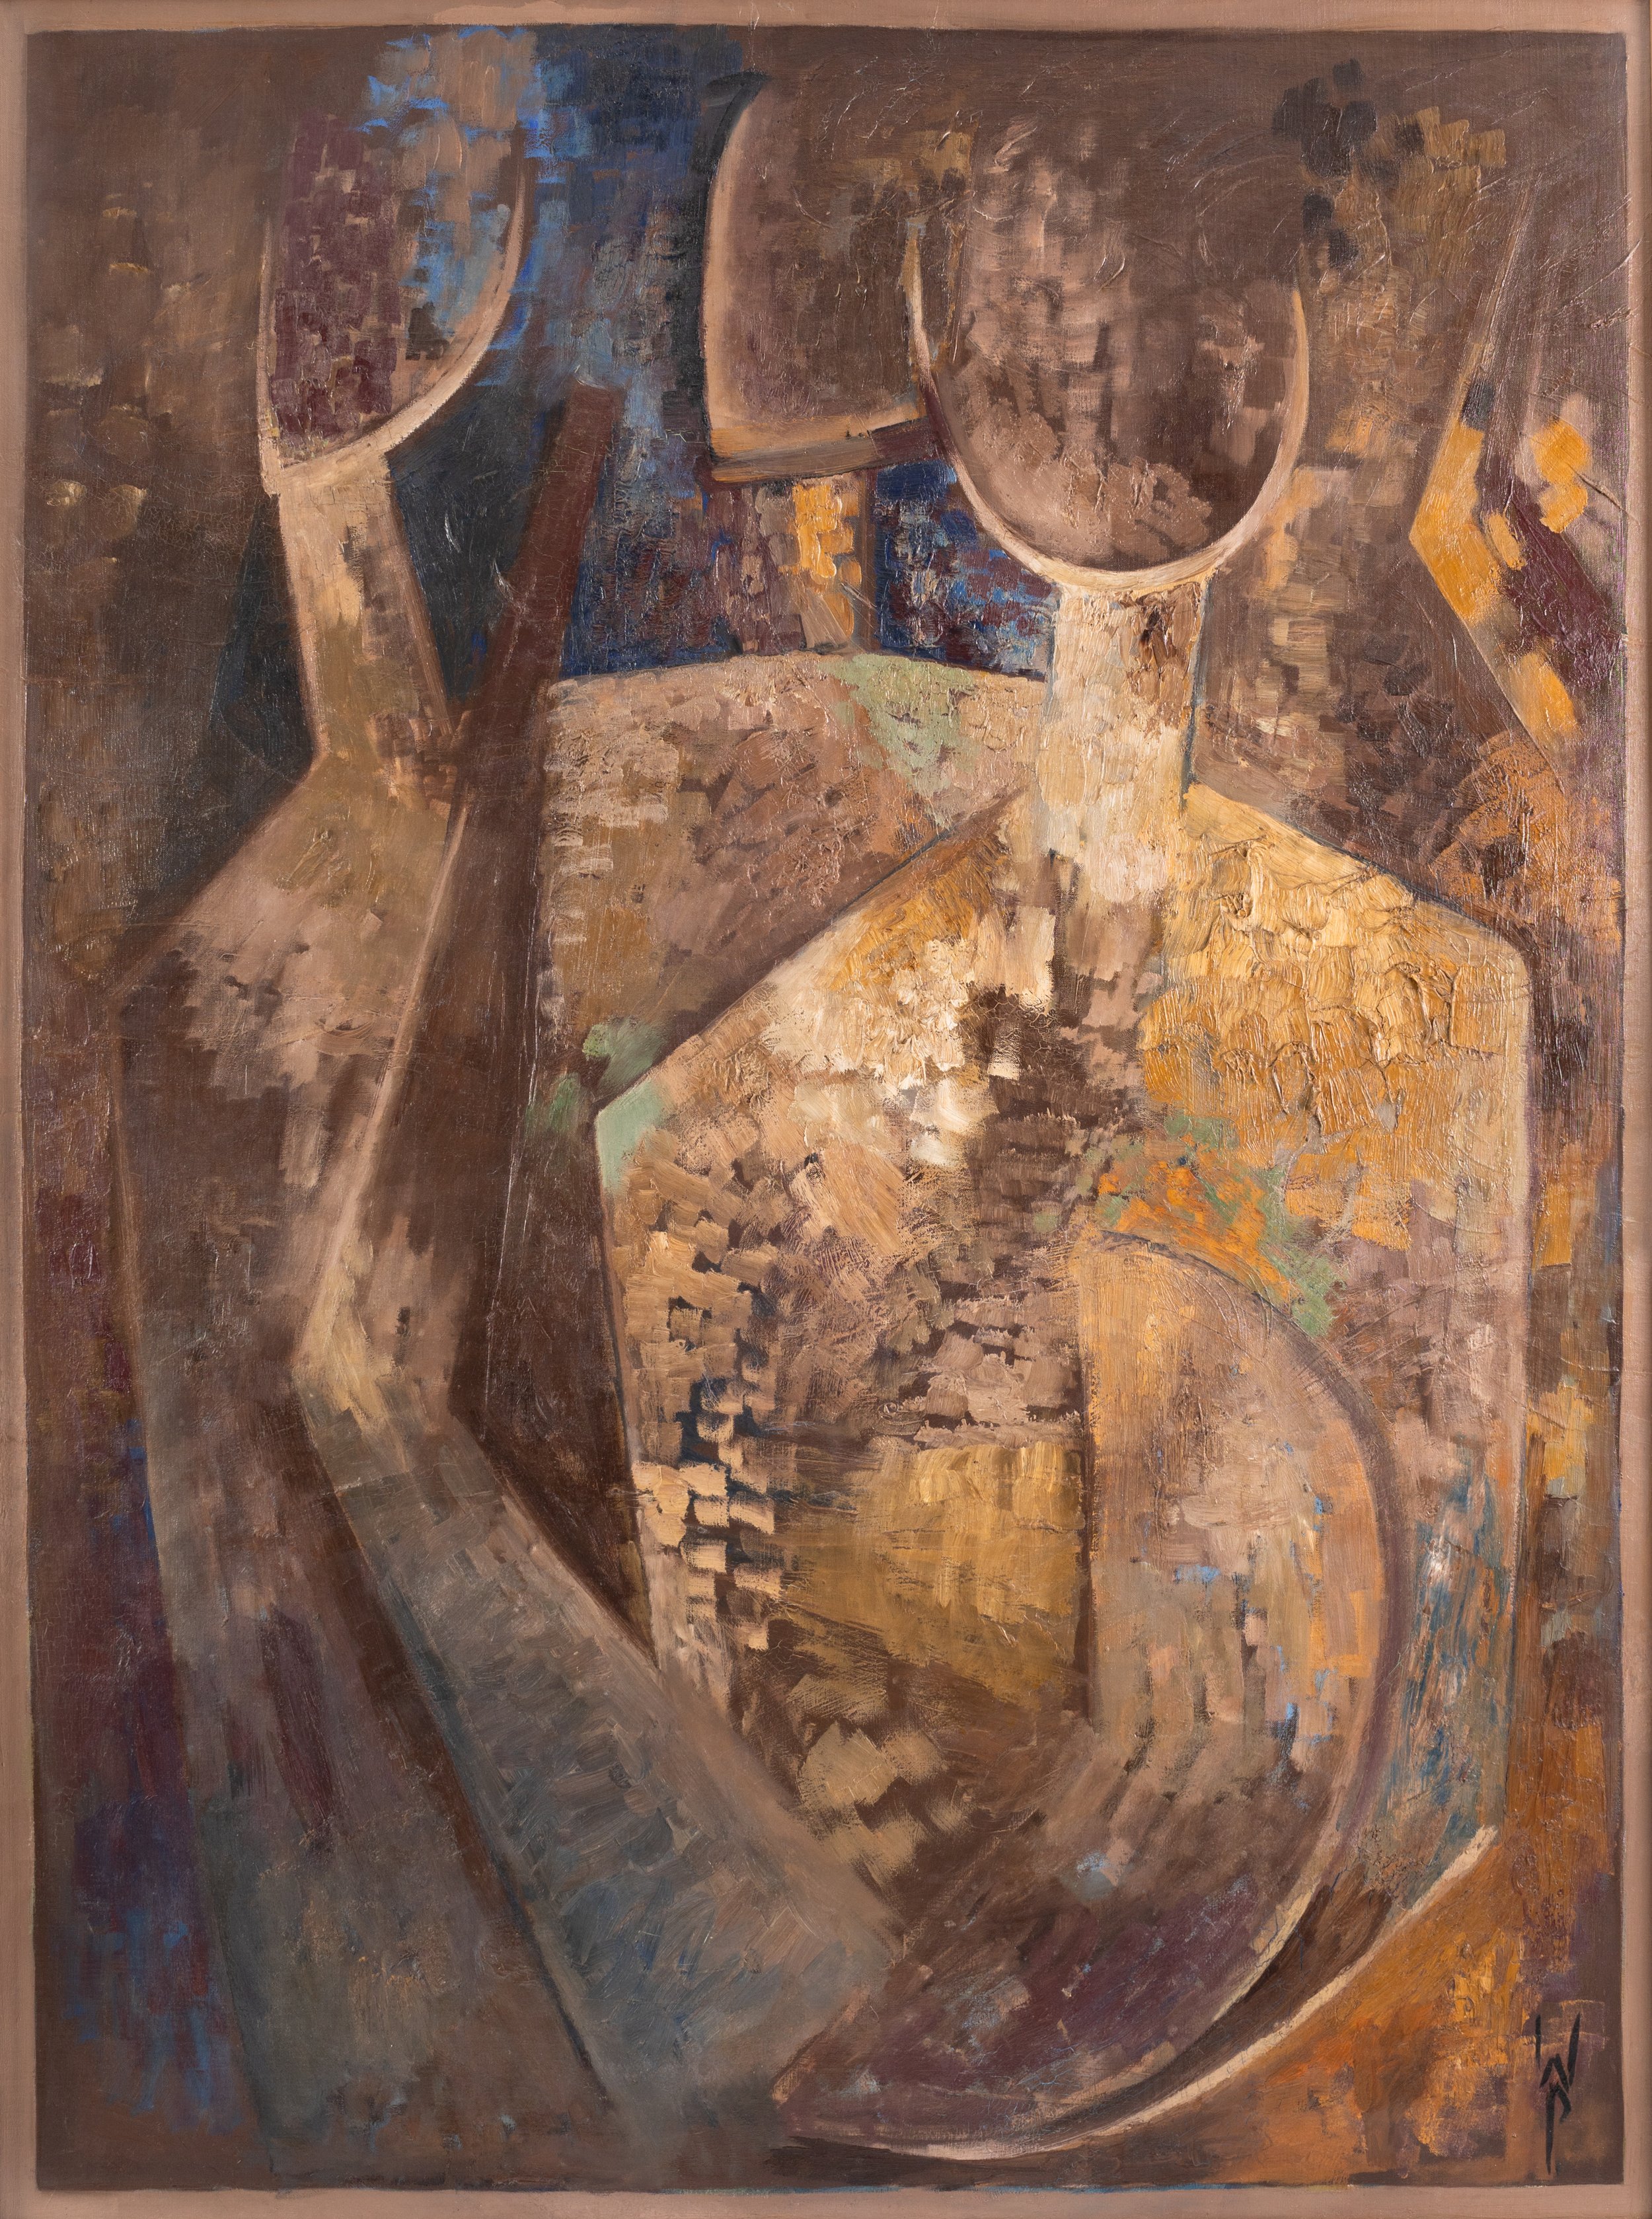  Wolfgang Paalen, Trois figures,  1953, oil on canvas, 51 x 37 in (29 1/2 x 94 cm)&nbsp; 